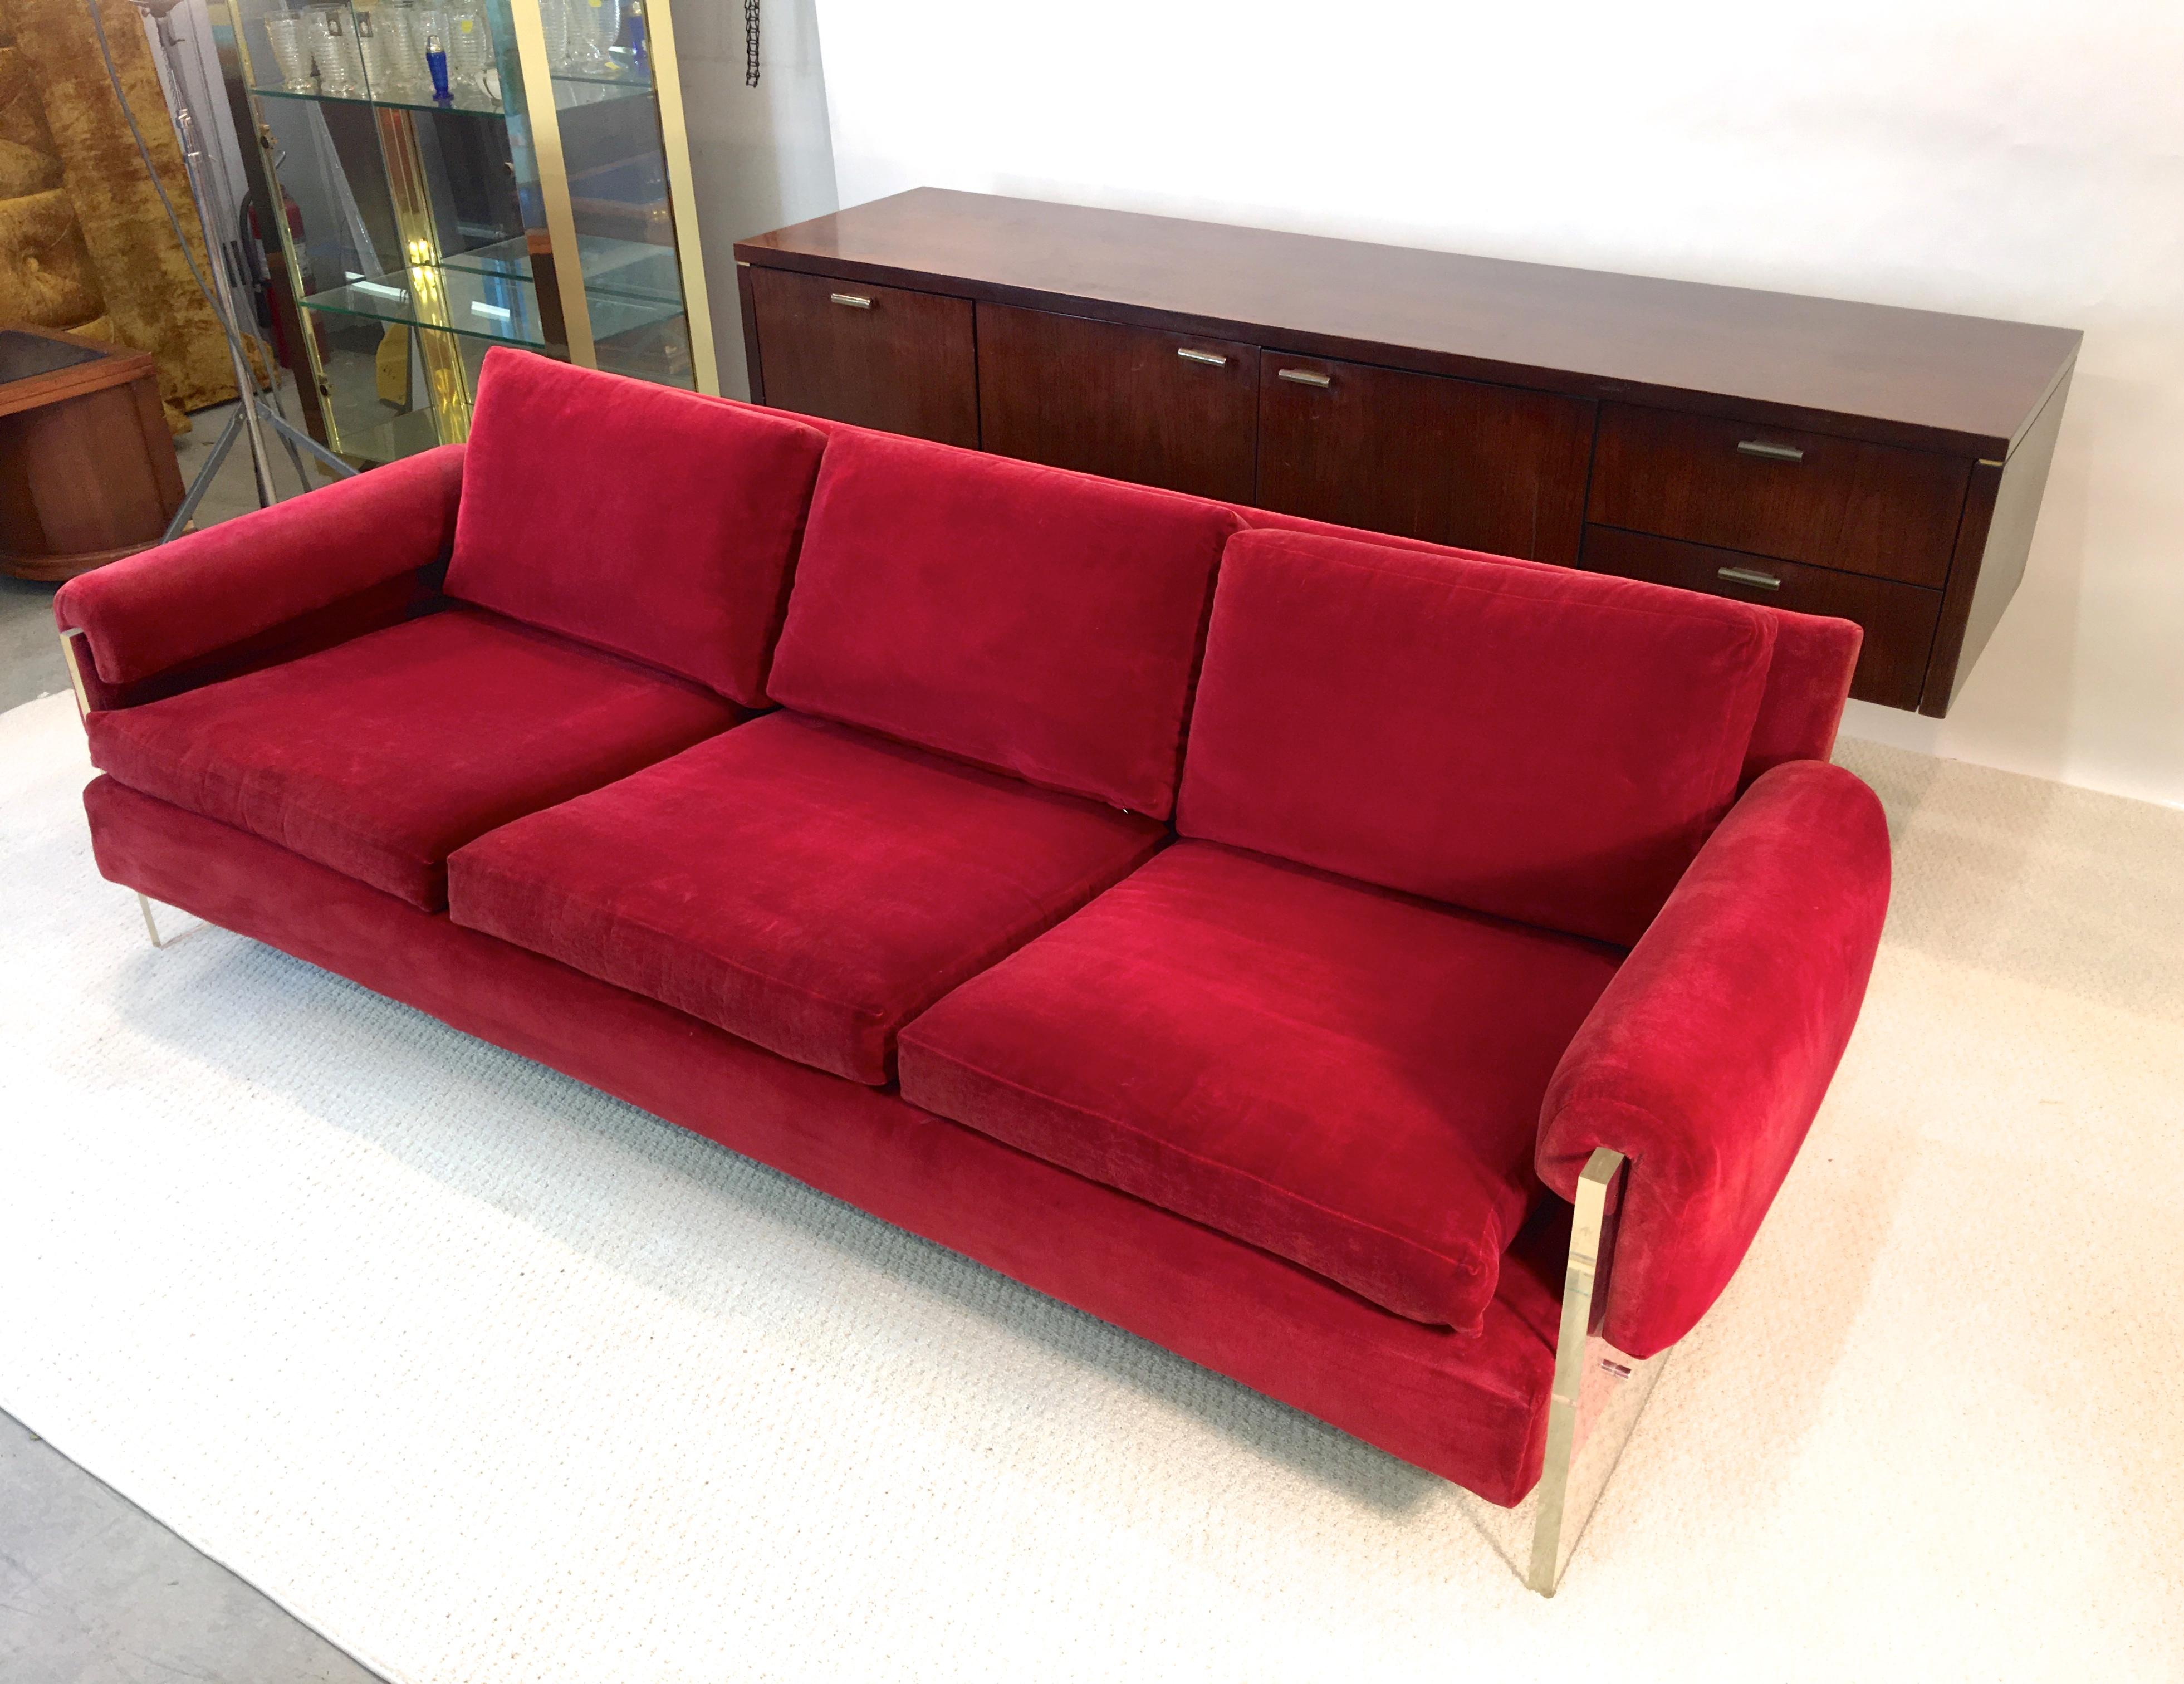 Milo Baughman for Thayer Coggin Sofa with Lucite slab sides in original red velvet with upholstered back and deck plus three seat cushions, three back cushions and upholstered arm rests.

Measures: Arm height 20 inches from floor.

Arm cushions can